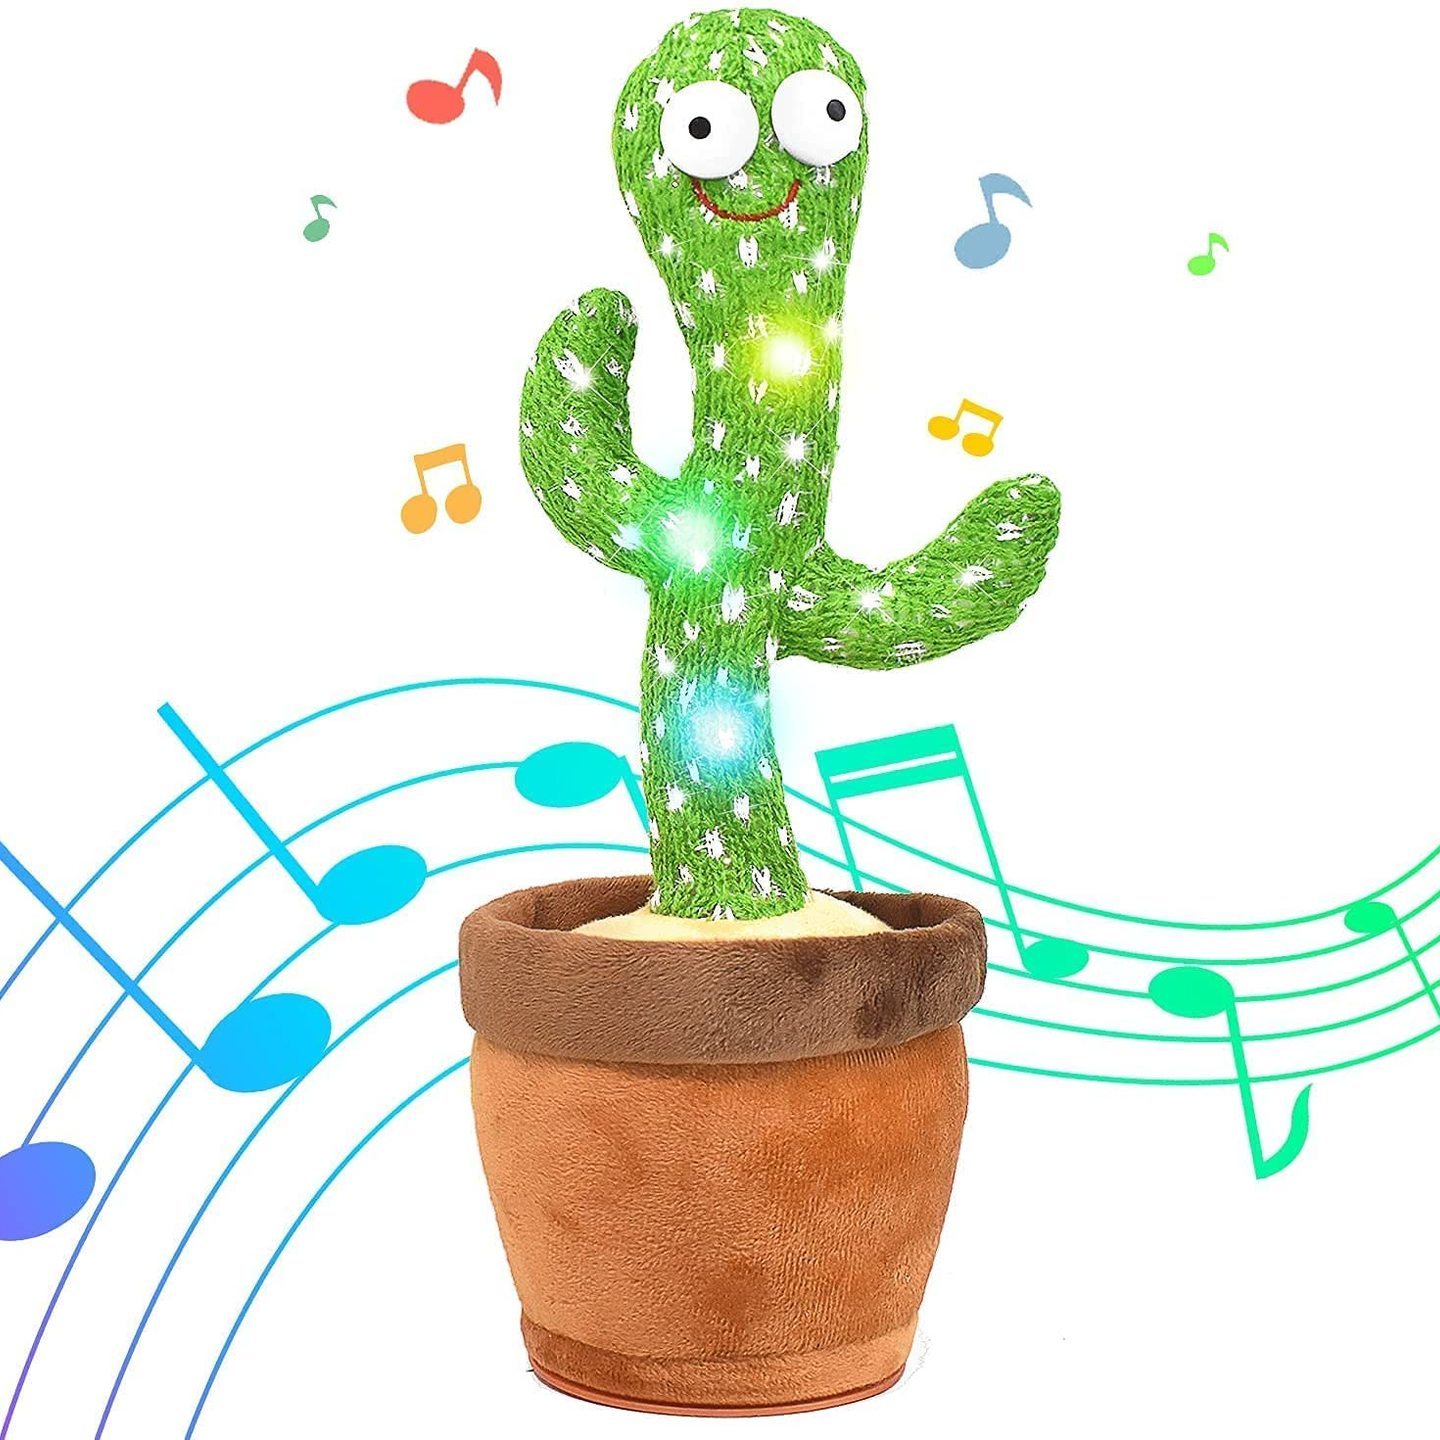 Singing, dancing & talking rechargeable Cactus toy with recording feature and lights